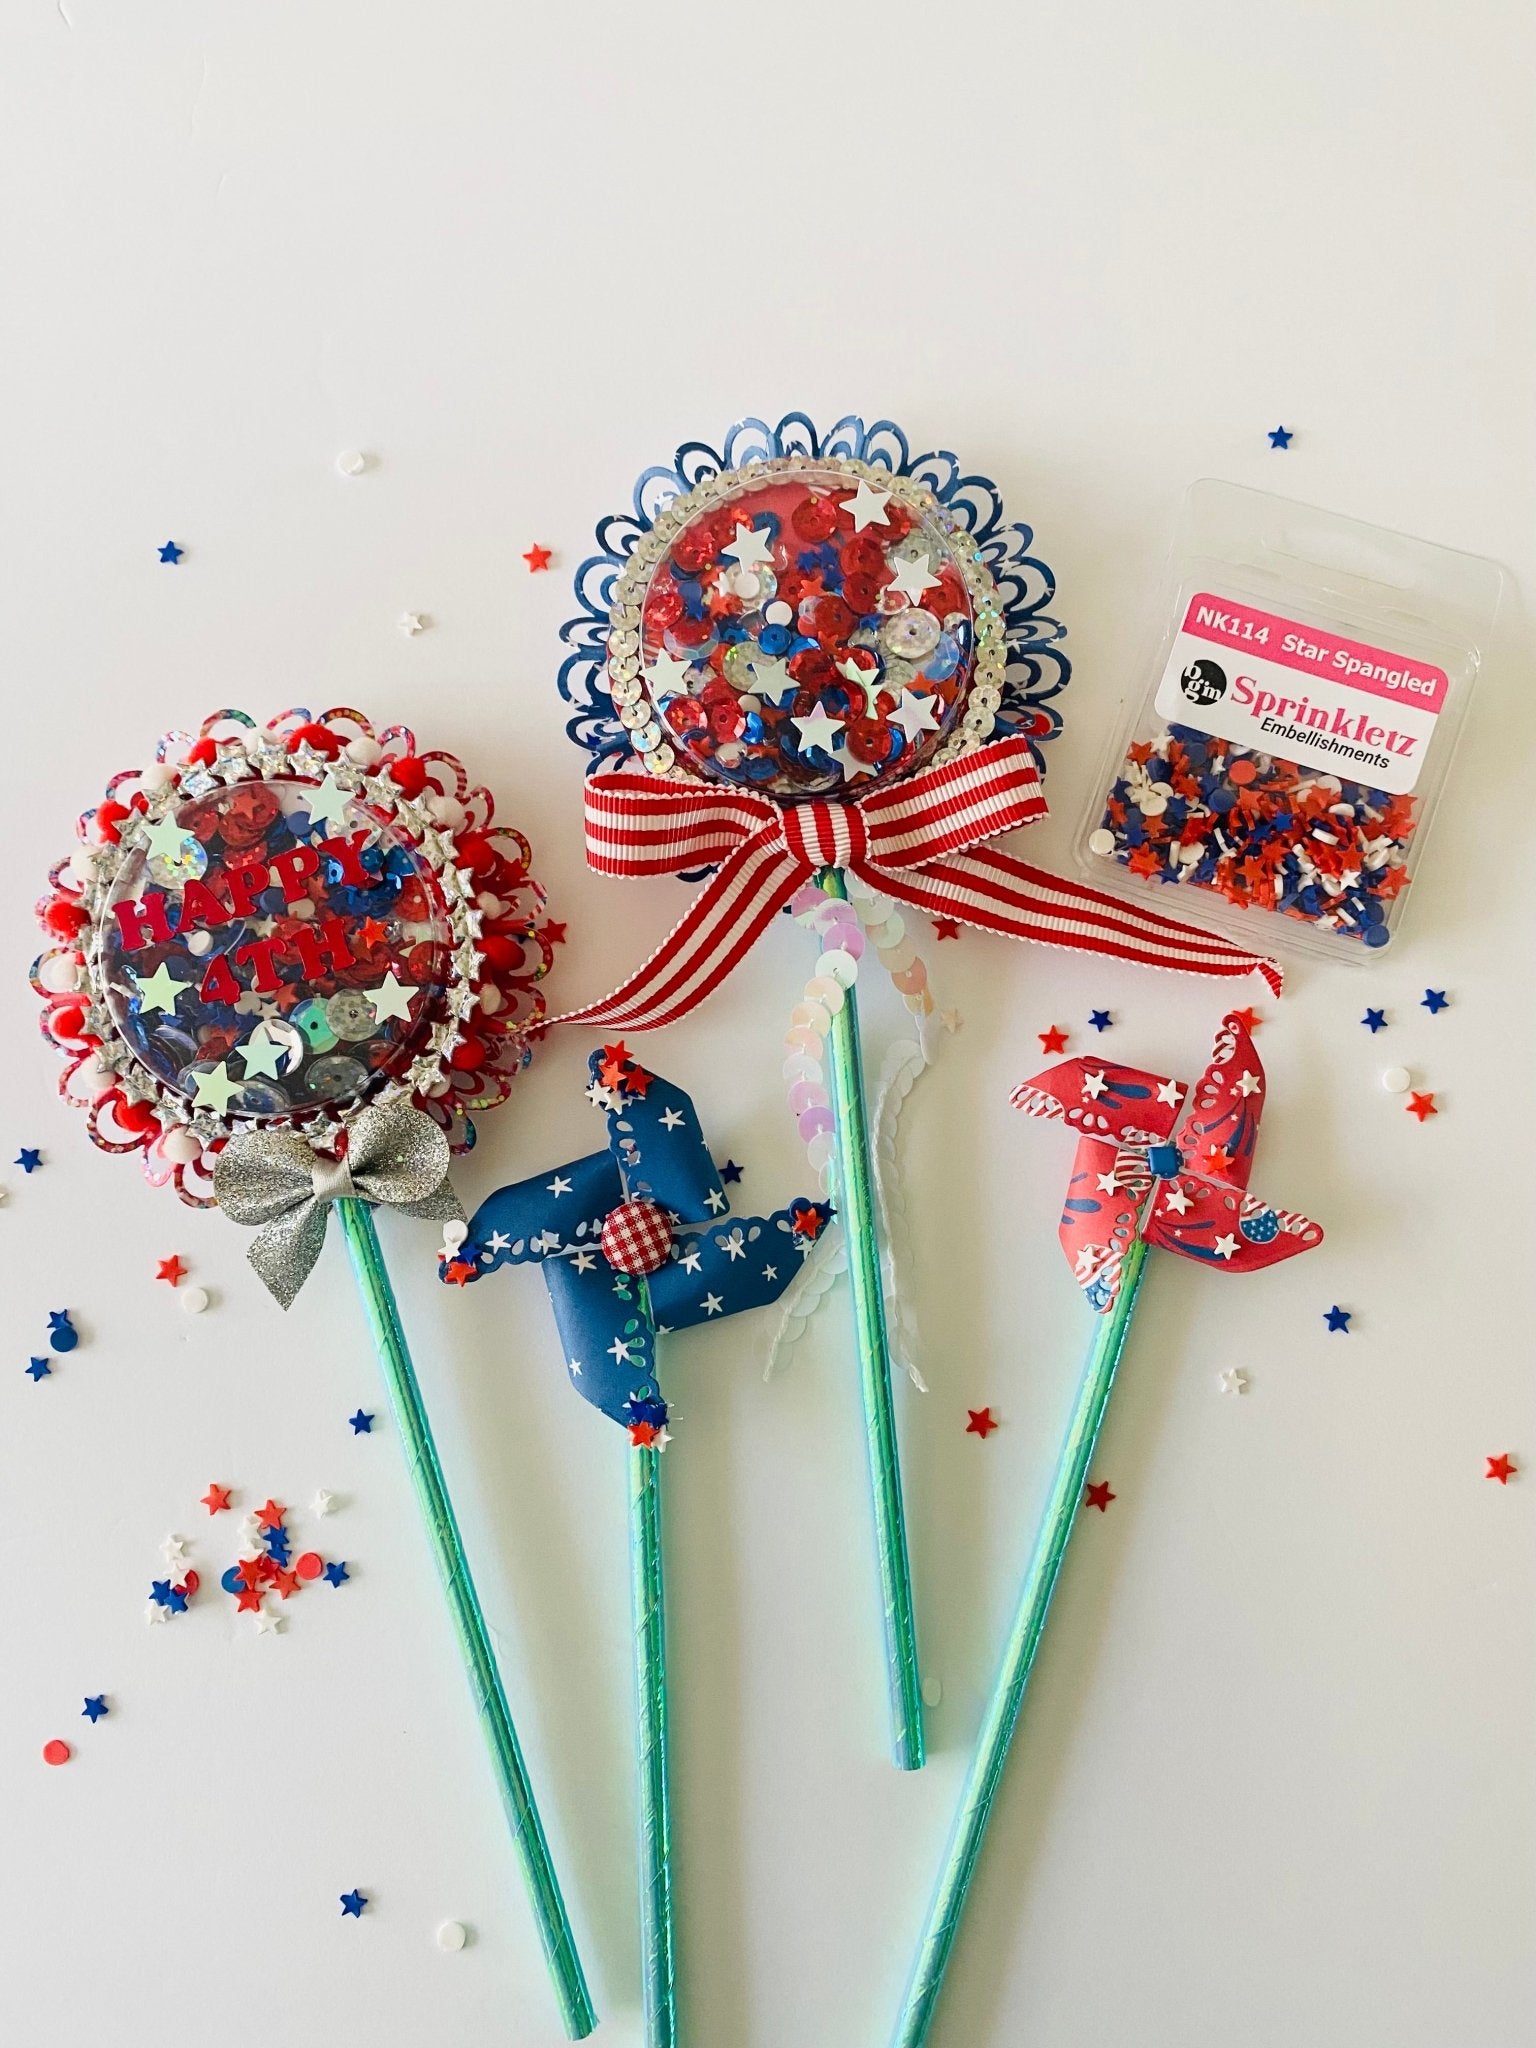 Star Spangled - Buttons Galore and More